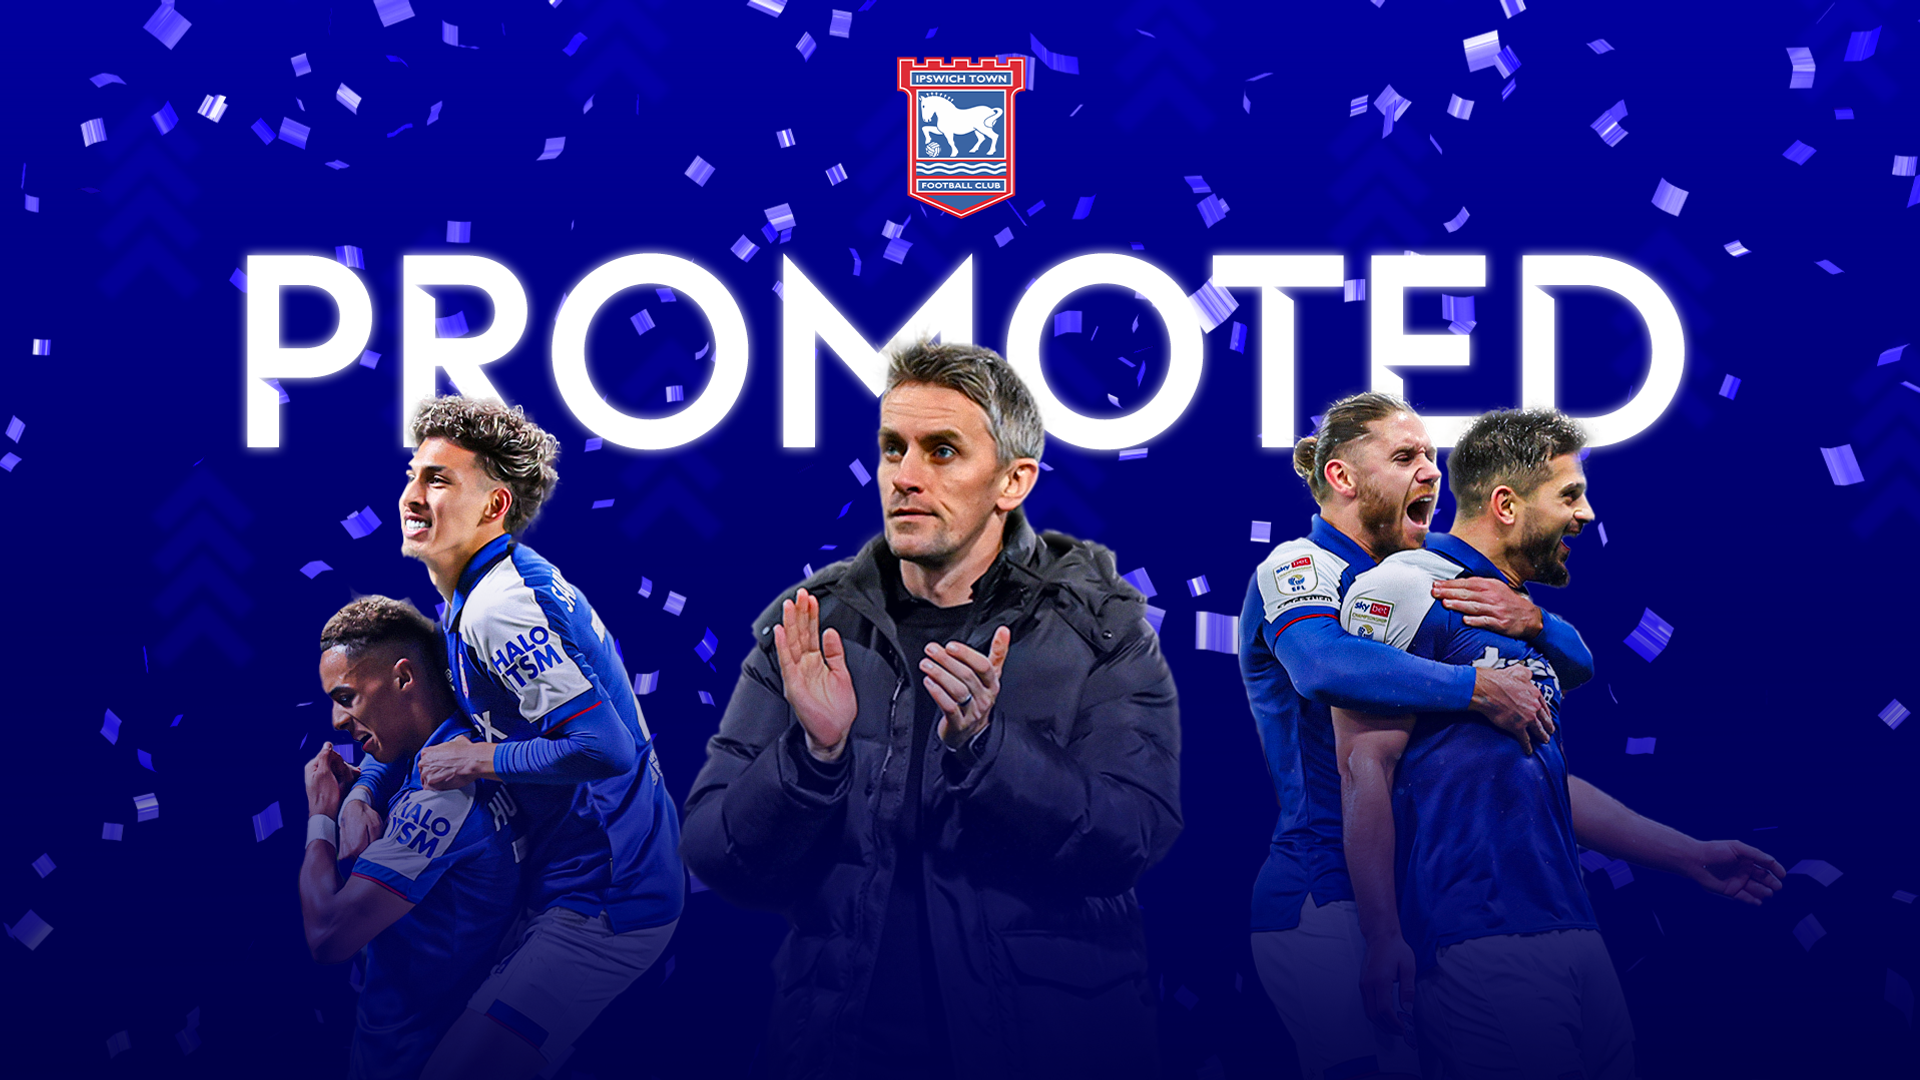 Ipswich promoted to the Premier League after 22 years away